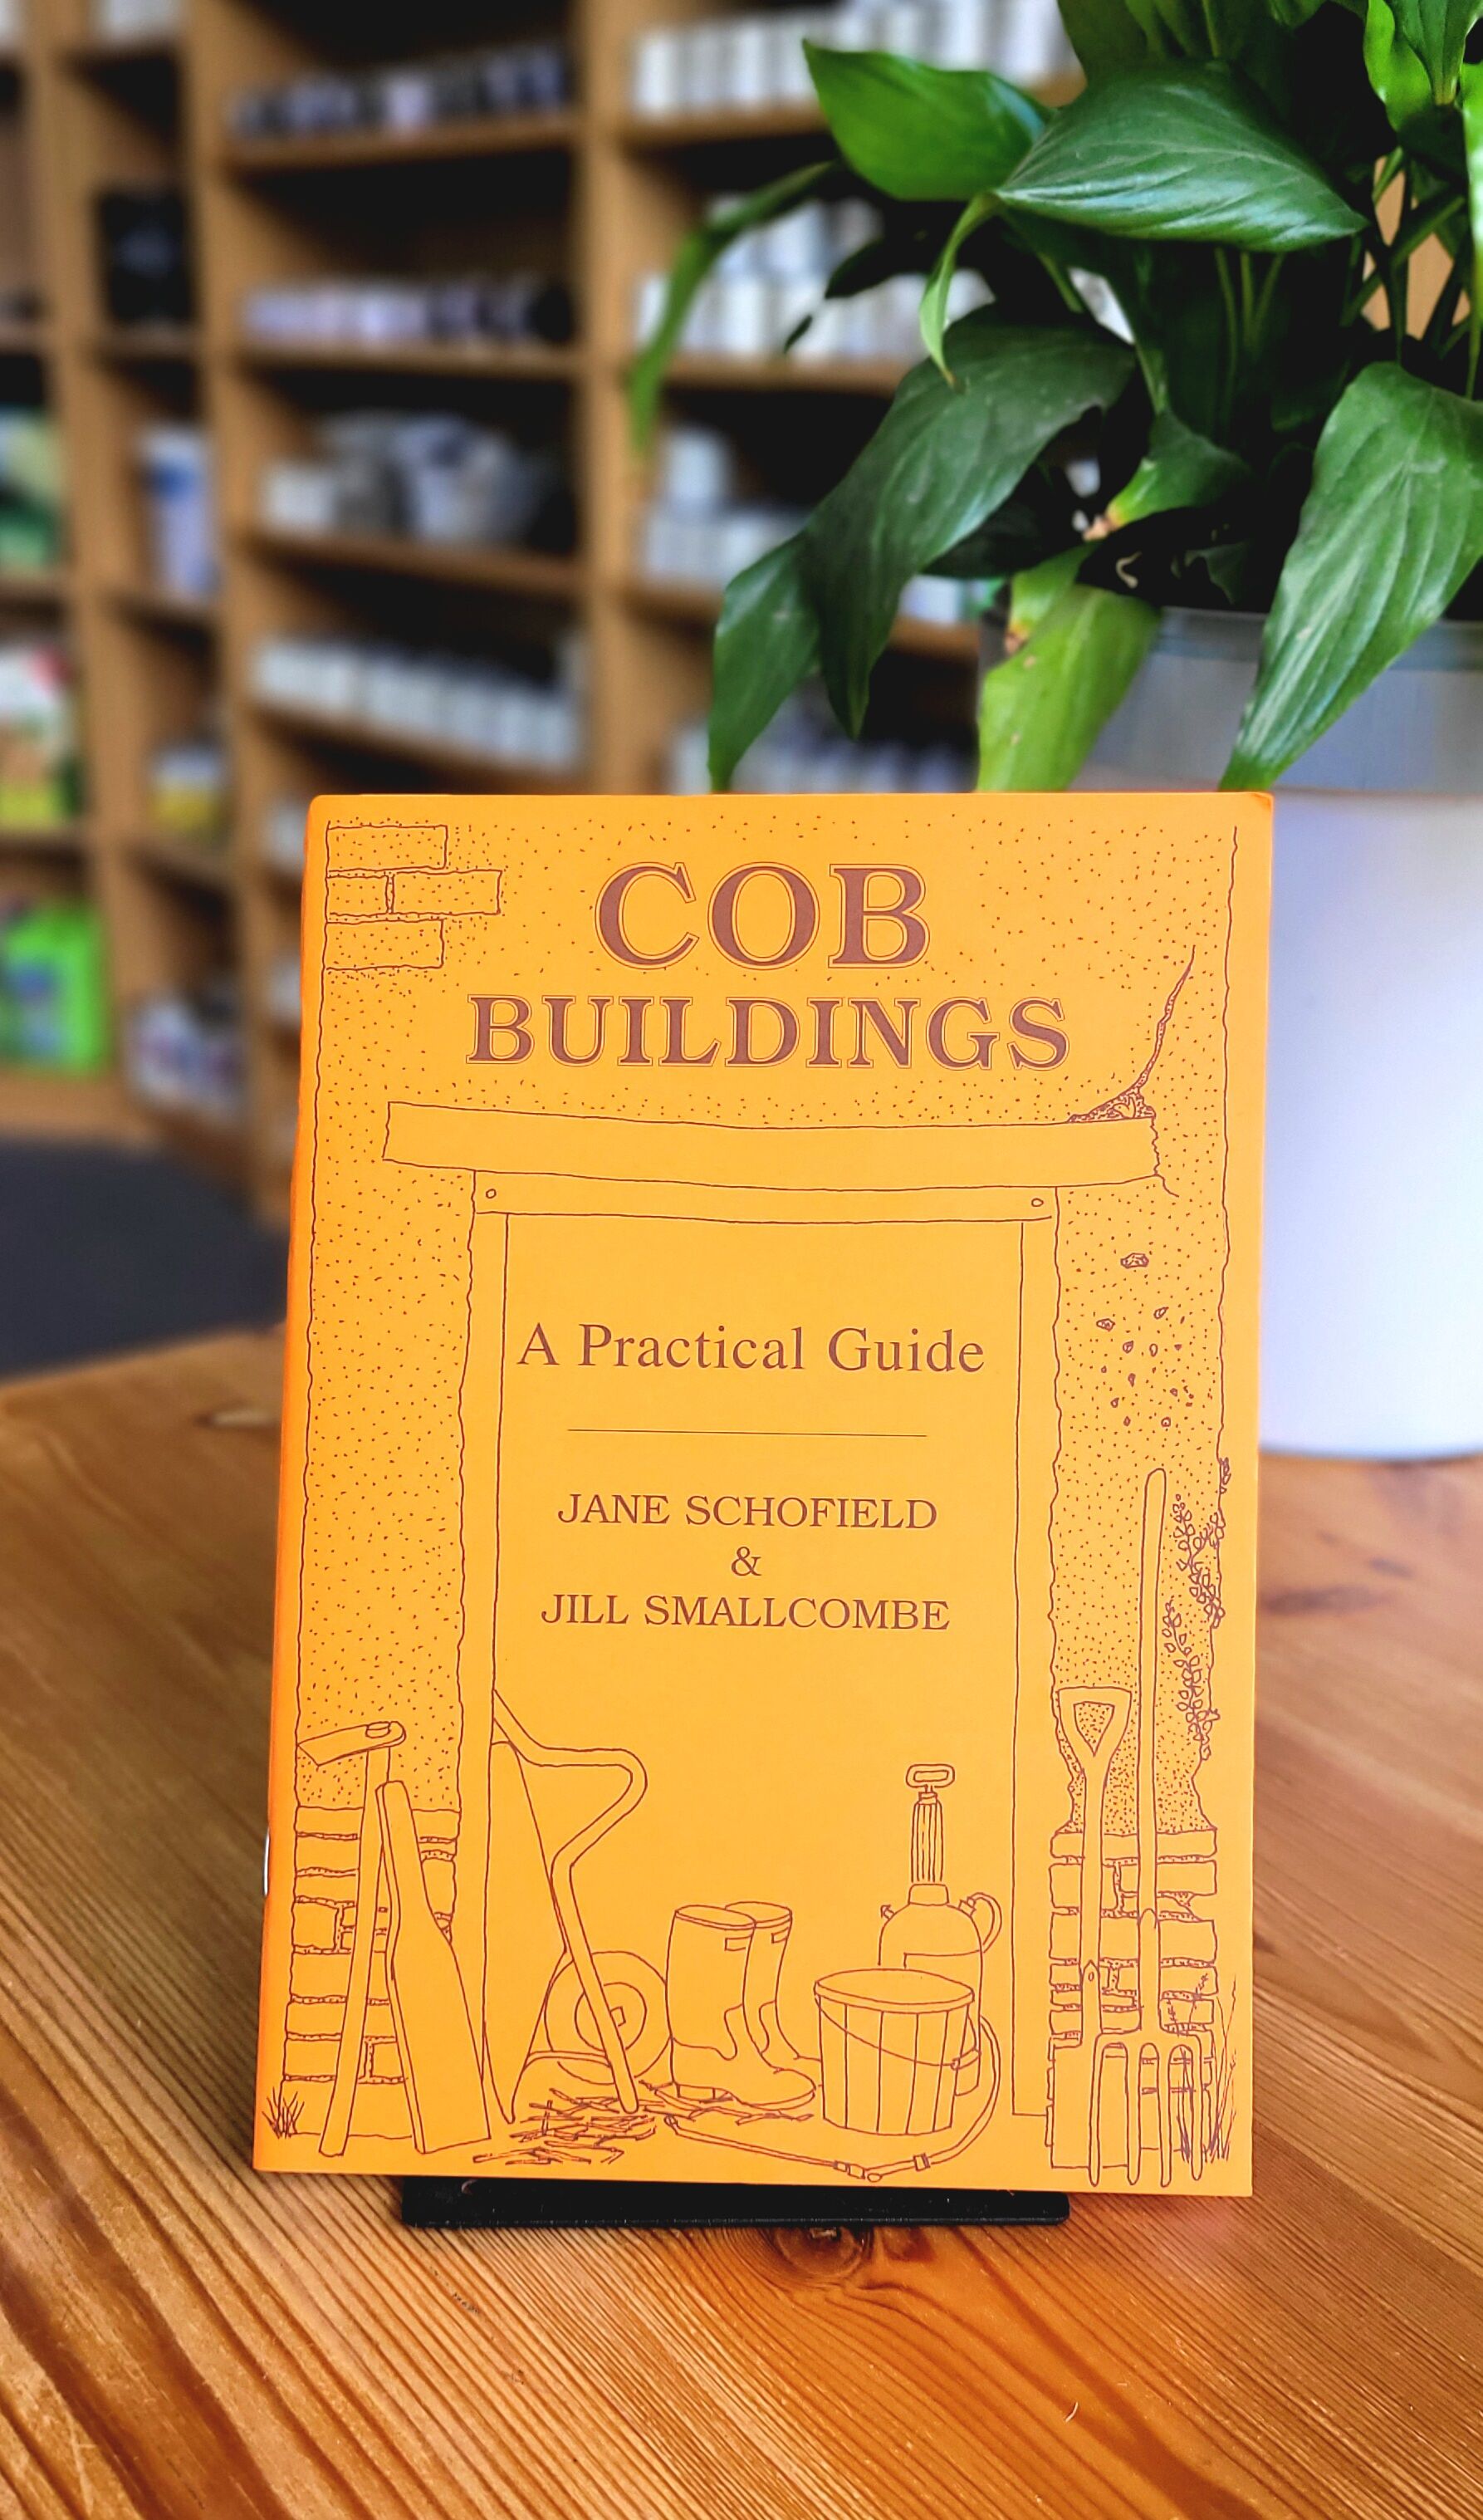 Cob Buildings - A Practical Guide by Jane Schofield & Jill Smallcombea